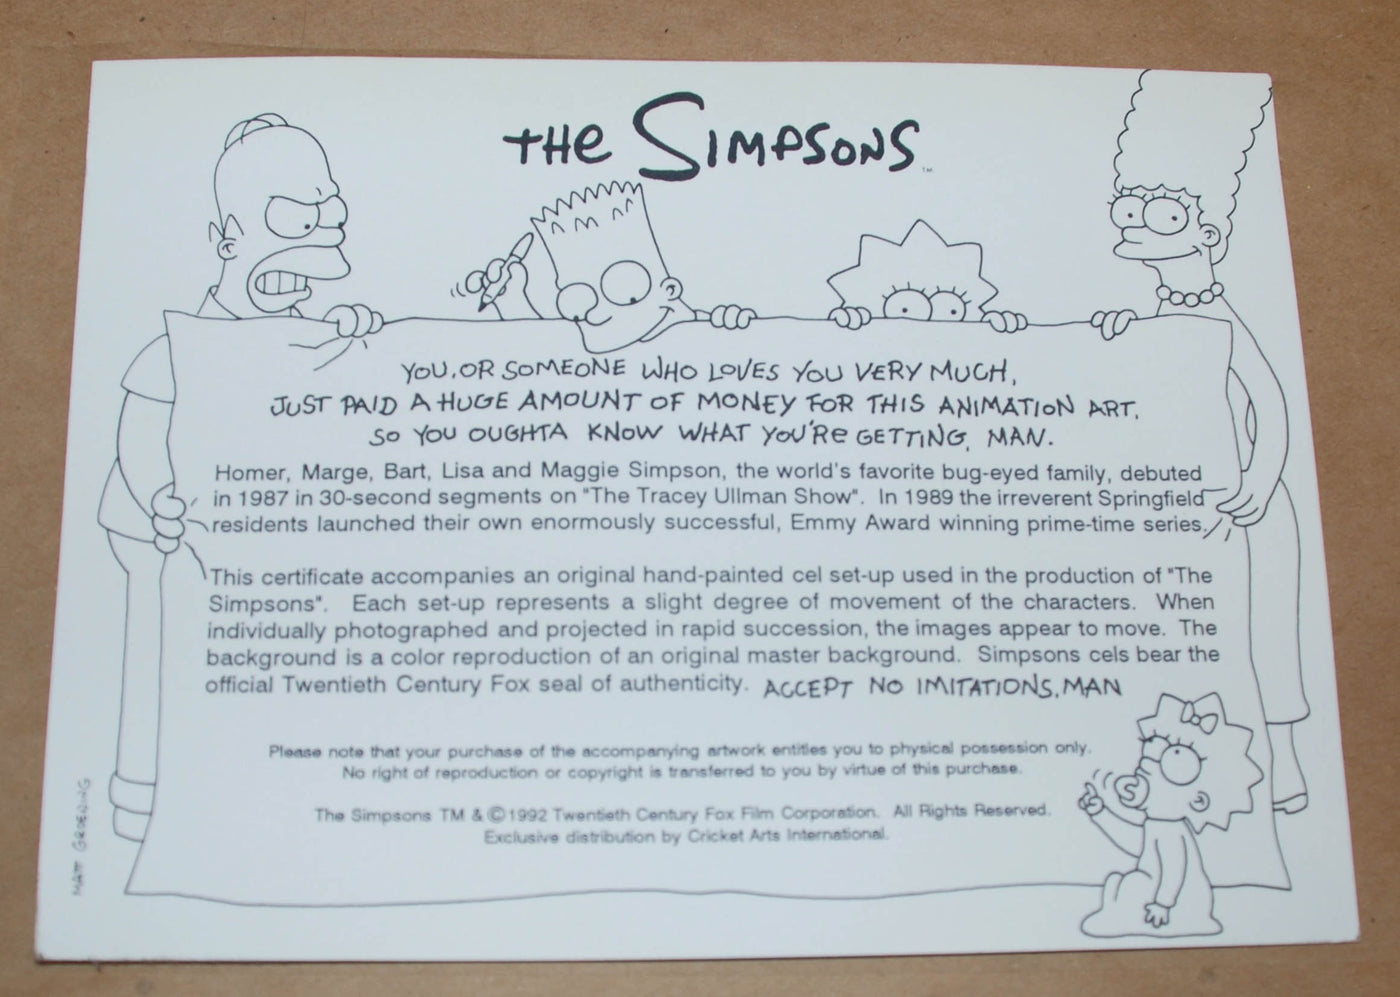 Original Simpsons Production Cel from the Simpsons featuring Bart and Milhouse